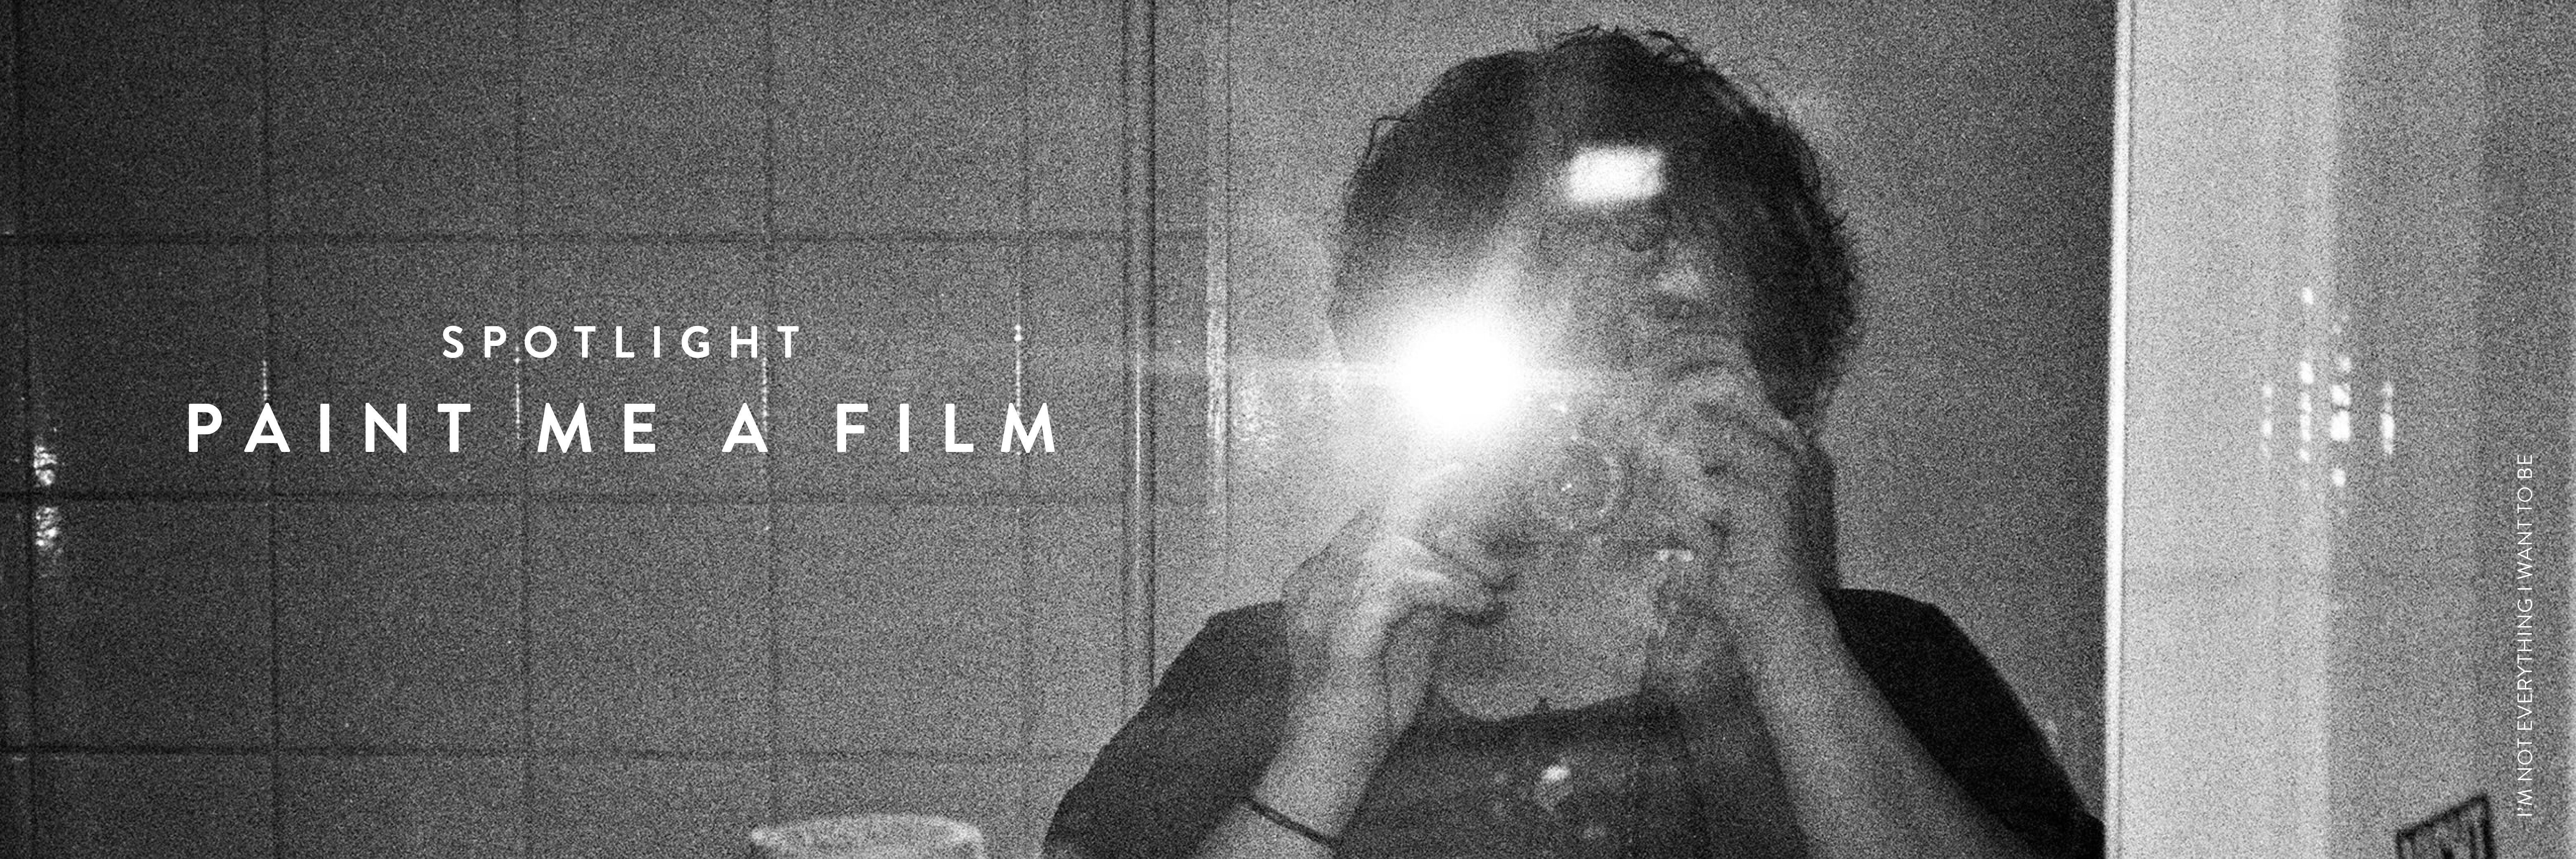 Black and white photograph of a woman taking a photo in the mirror, the camera flash obscuring her face. White text on the left of the image reads: Spotlight PAINT ME A FILM